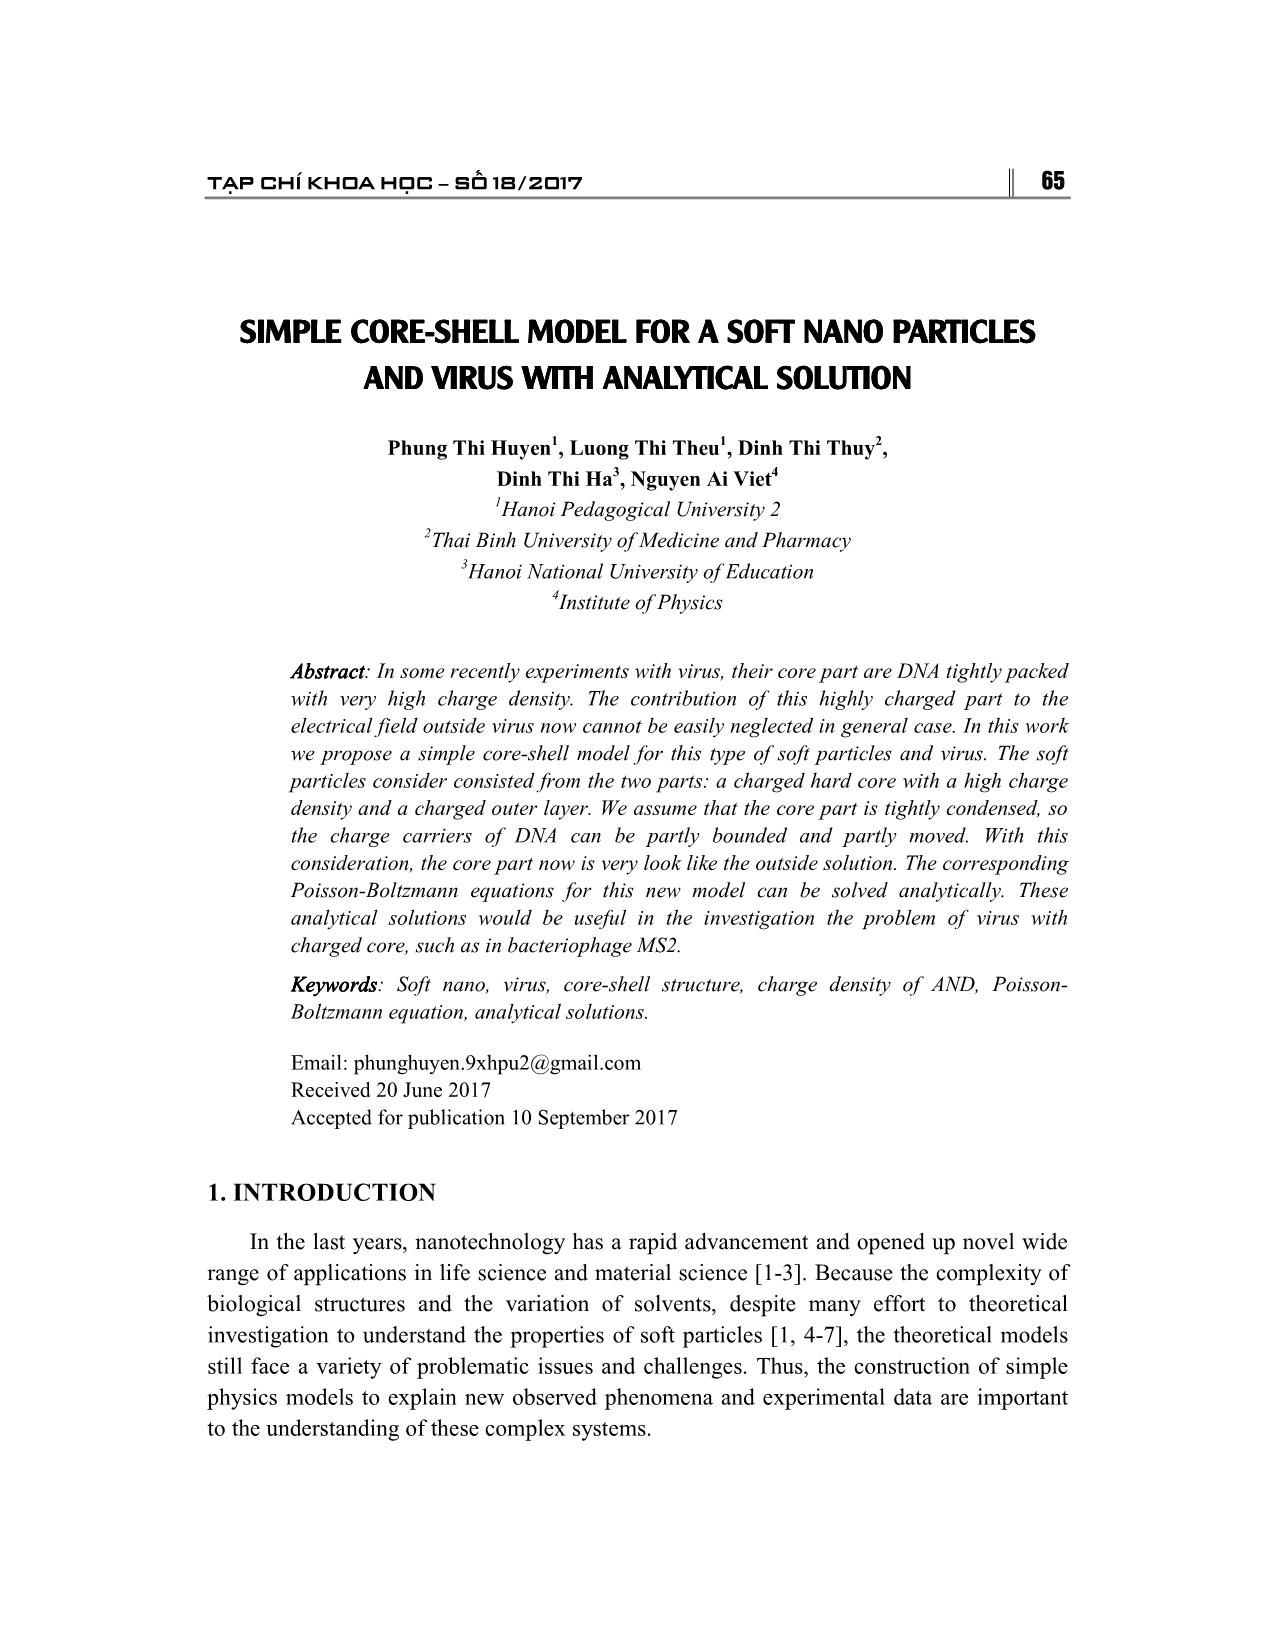 Simple core-Shell model for a soft nano particles and virus with analytical solution trang 1